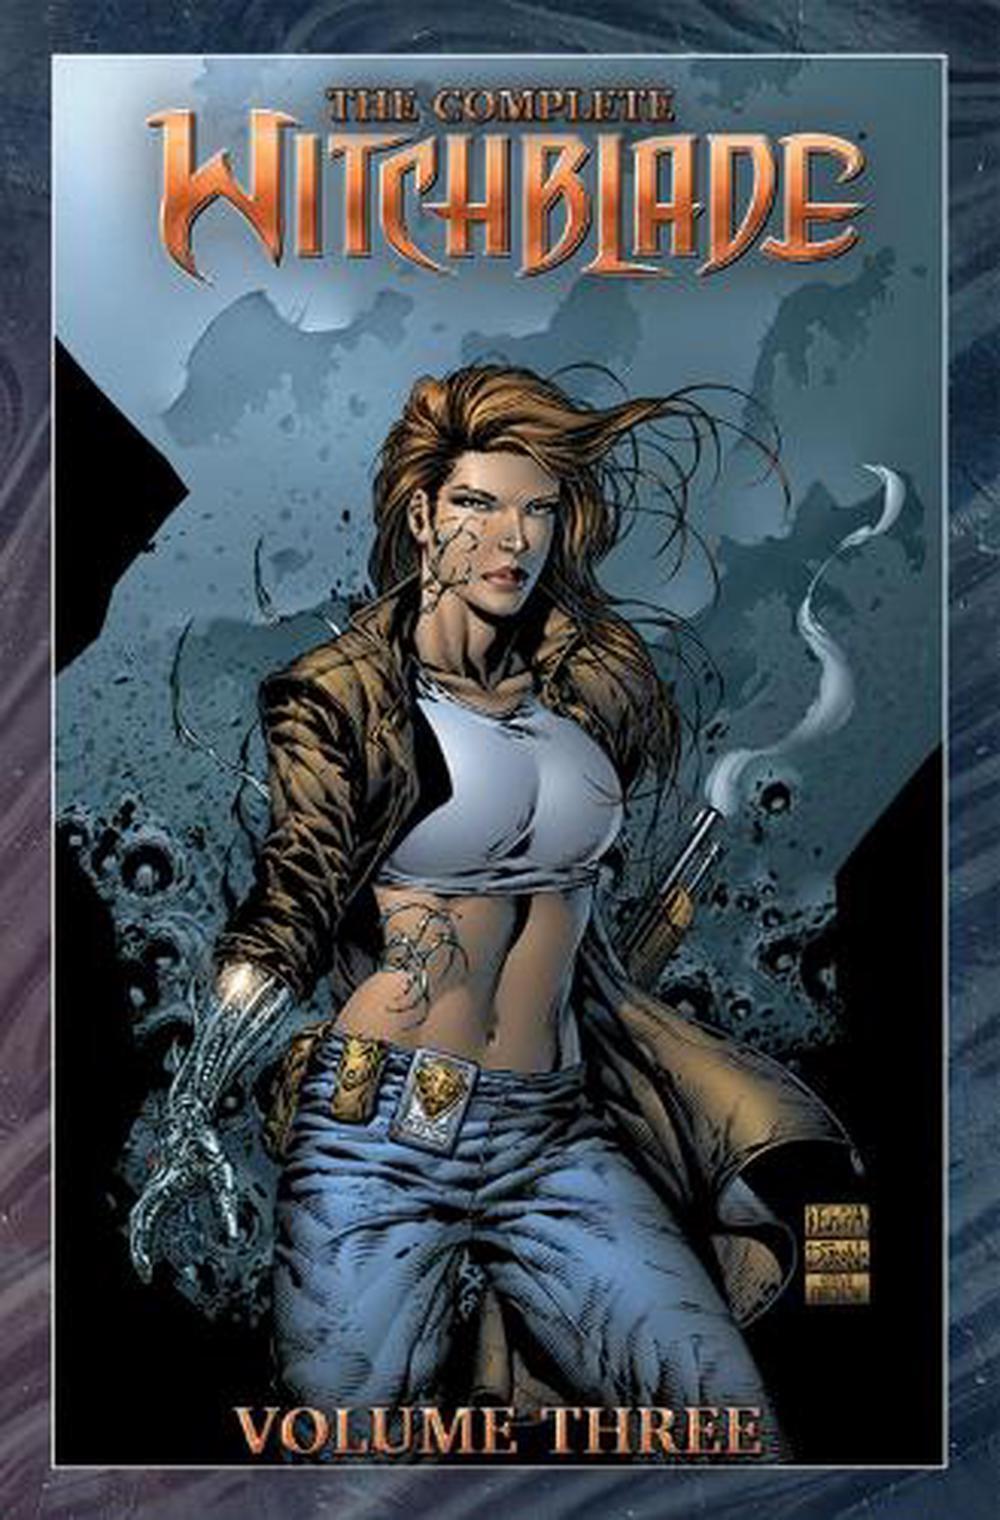 The Complete Witchblade Volume 3 by David Wohl (English) Hardcover Book